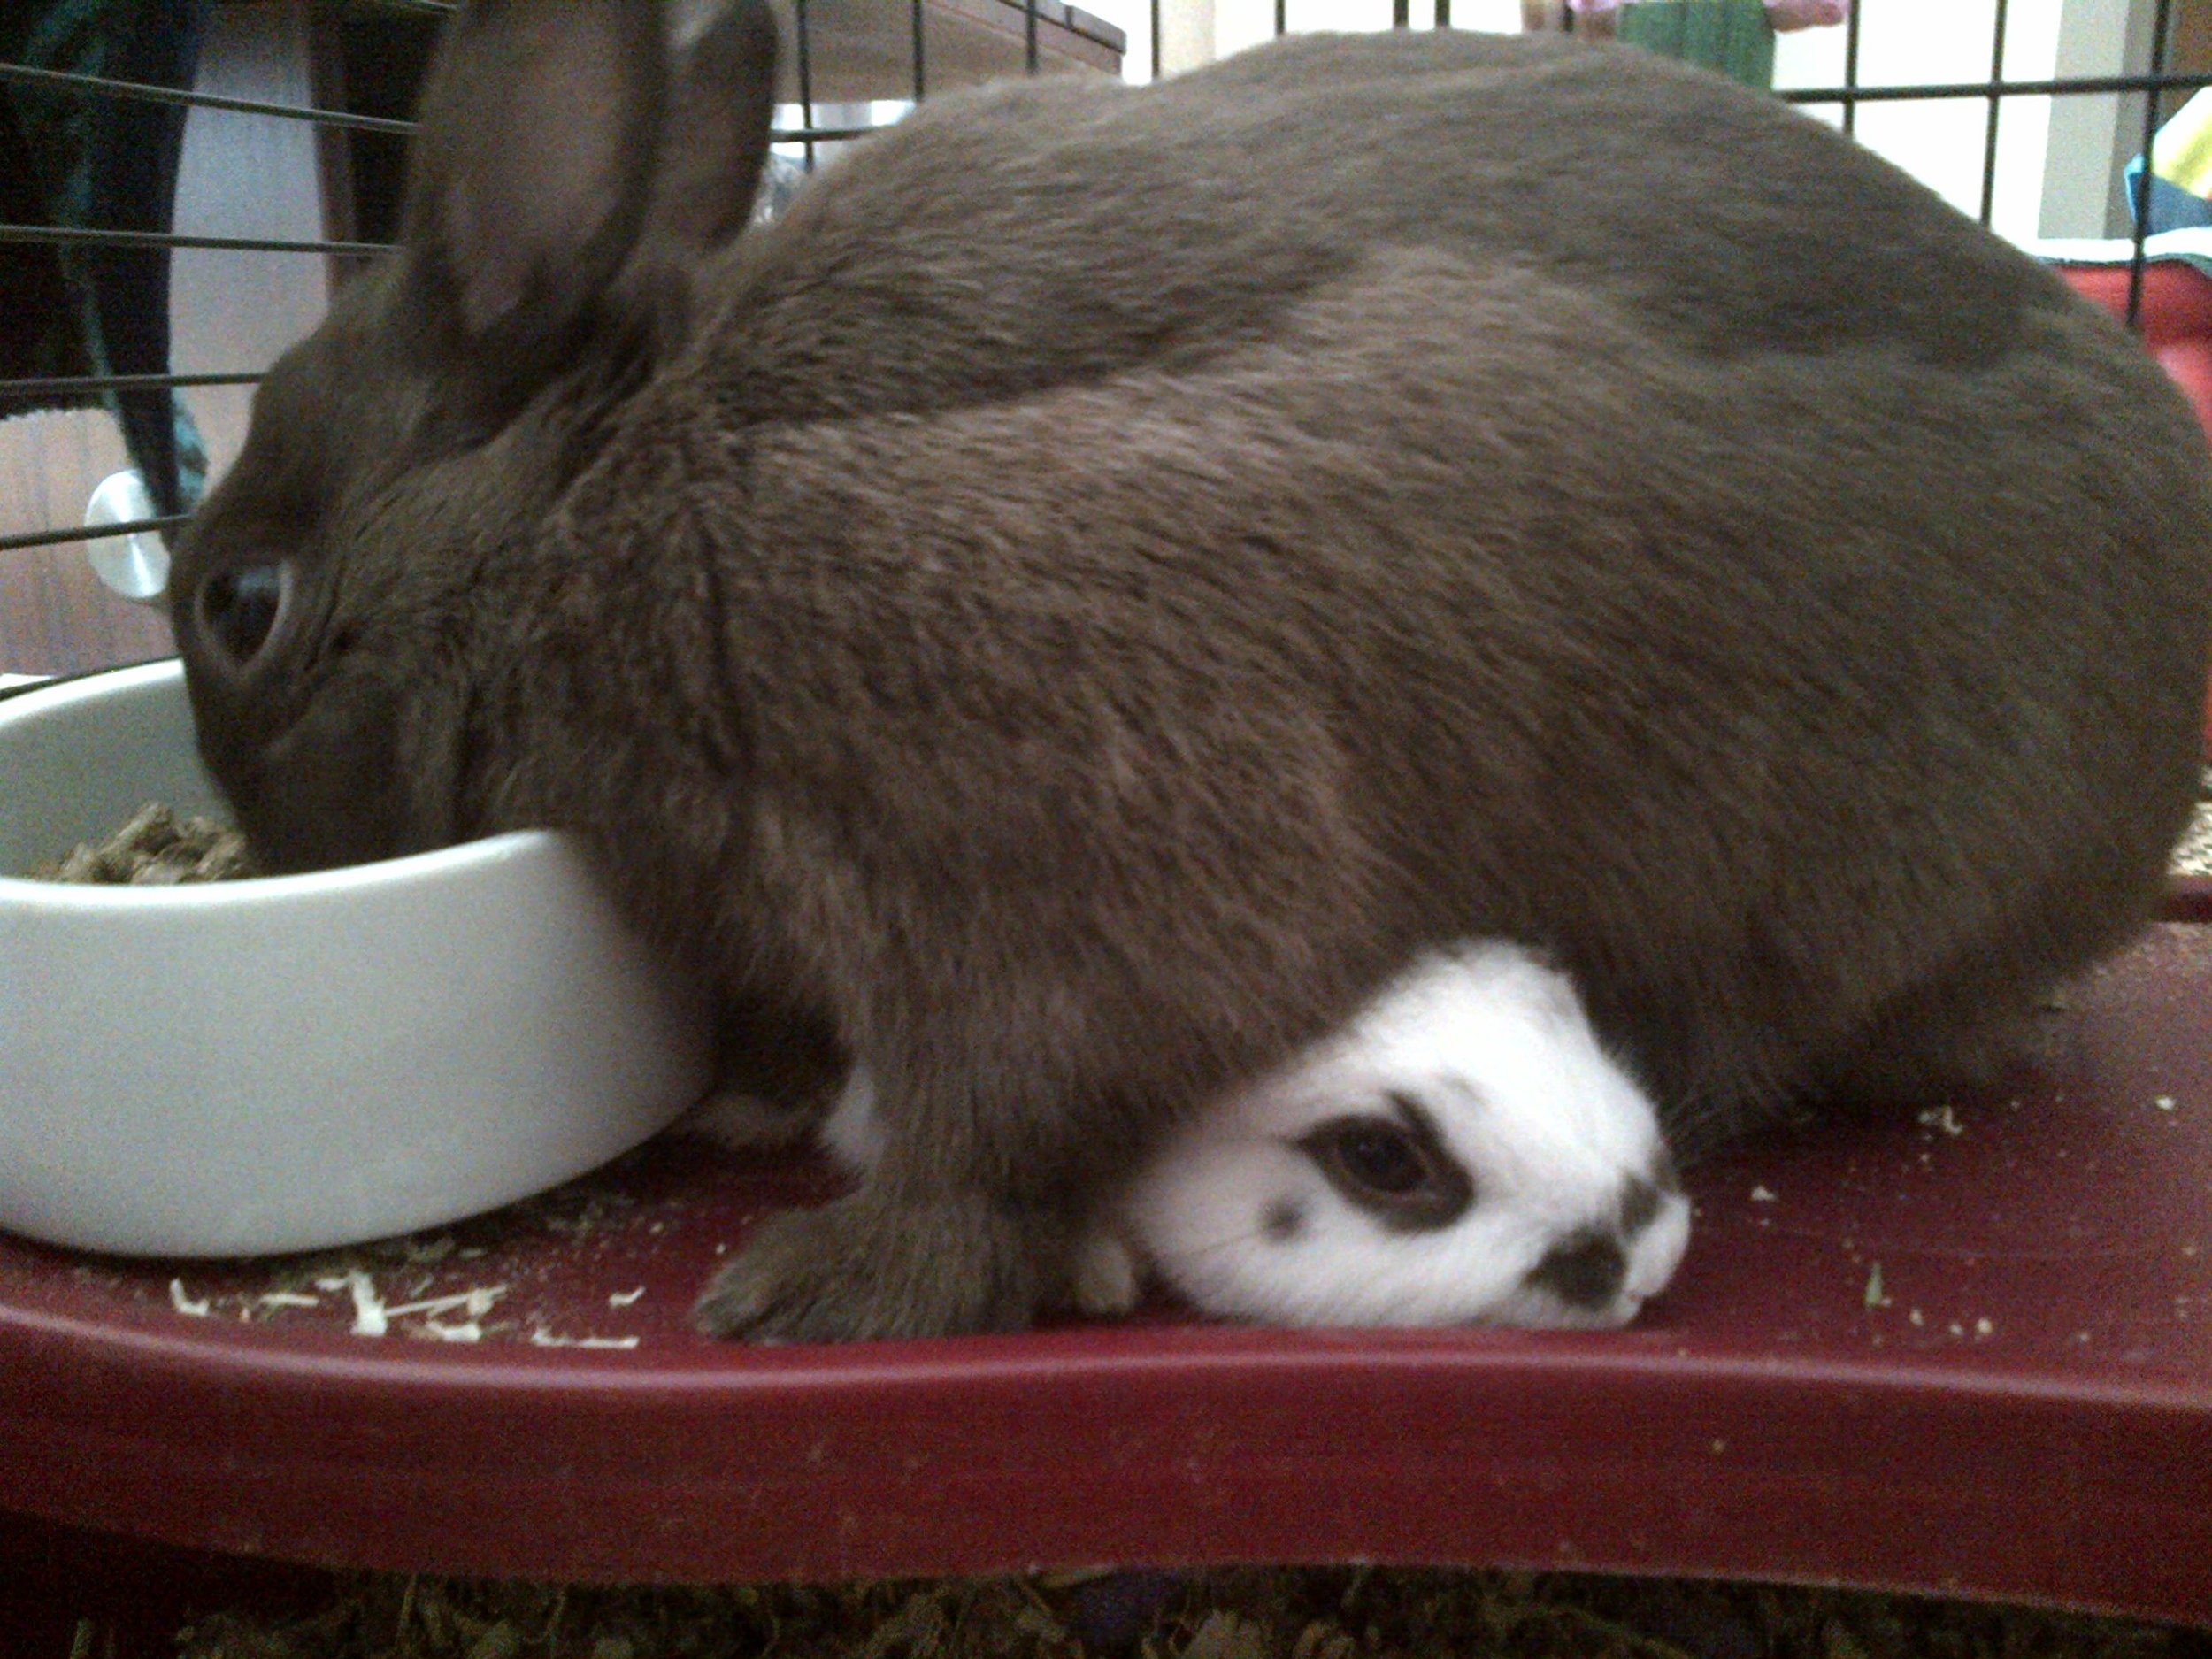 Bunny, You're Not Using Good Table Manners